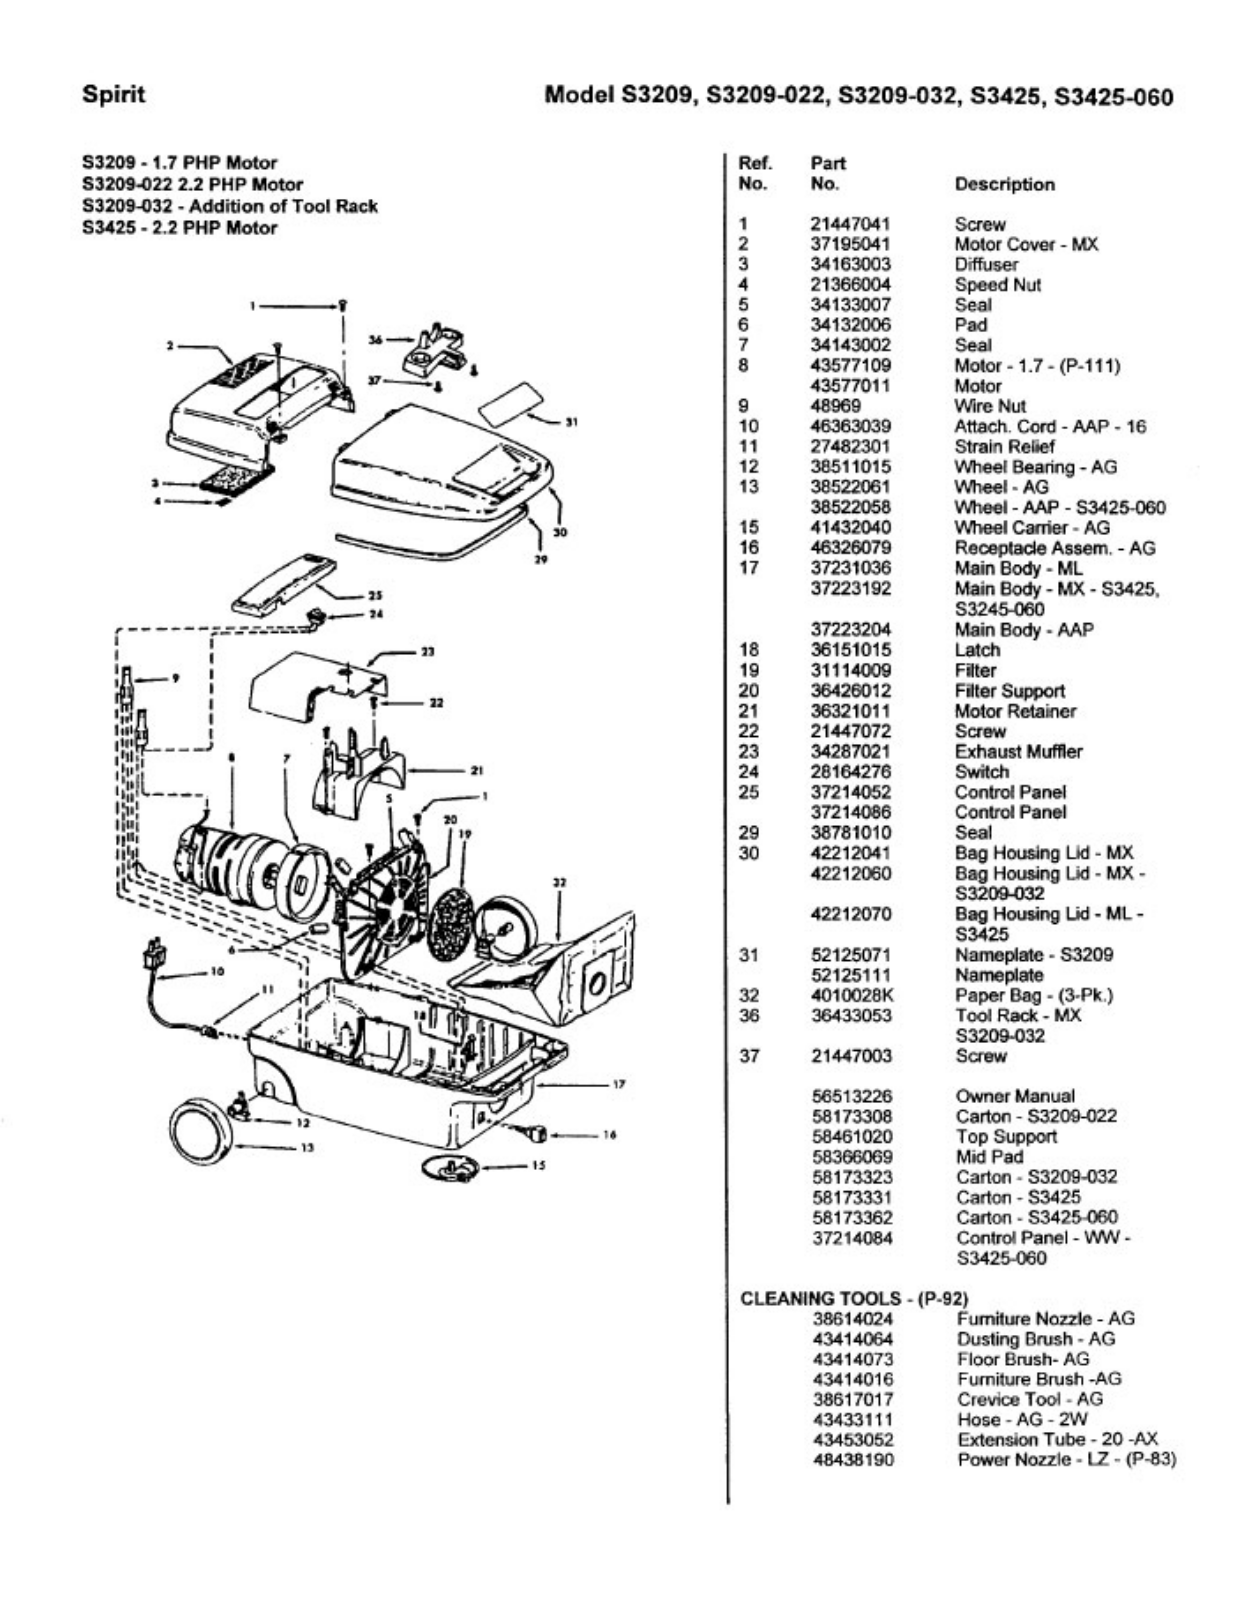 Hoover S3209, S3425-060, S3425, S3209-032, S3209-022 Owner's Manual